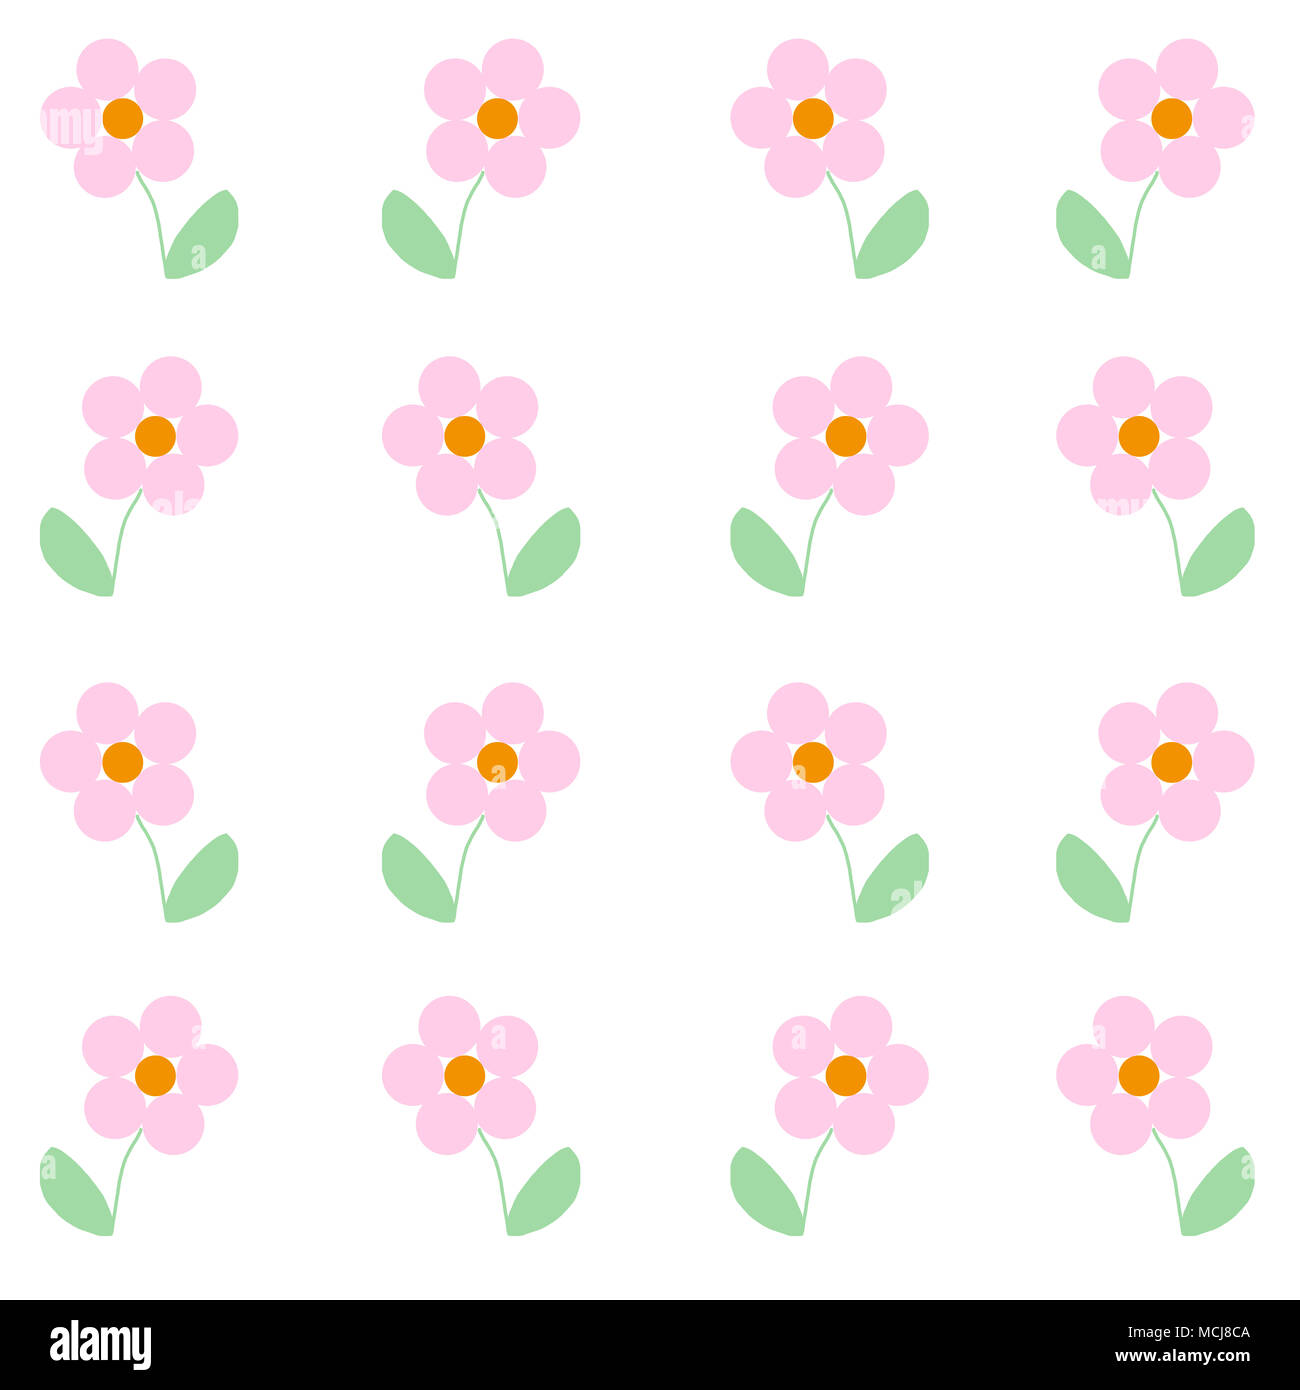 Cute illustrated baby pink flowers simple print to be used as a canvas background wallpaper childlike drawing with pastel colors stock photo